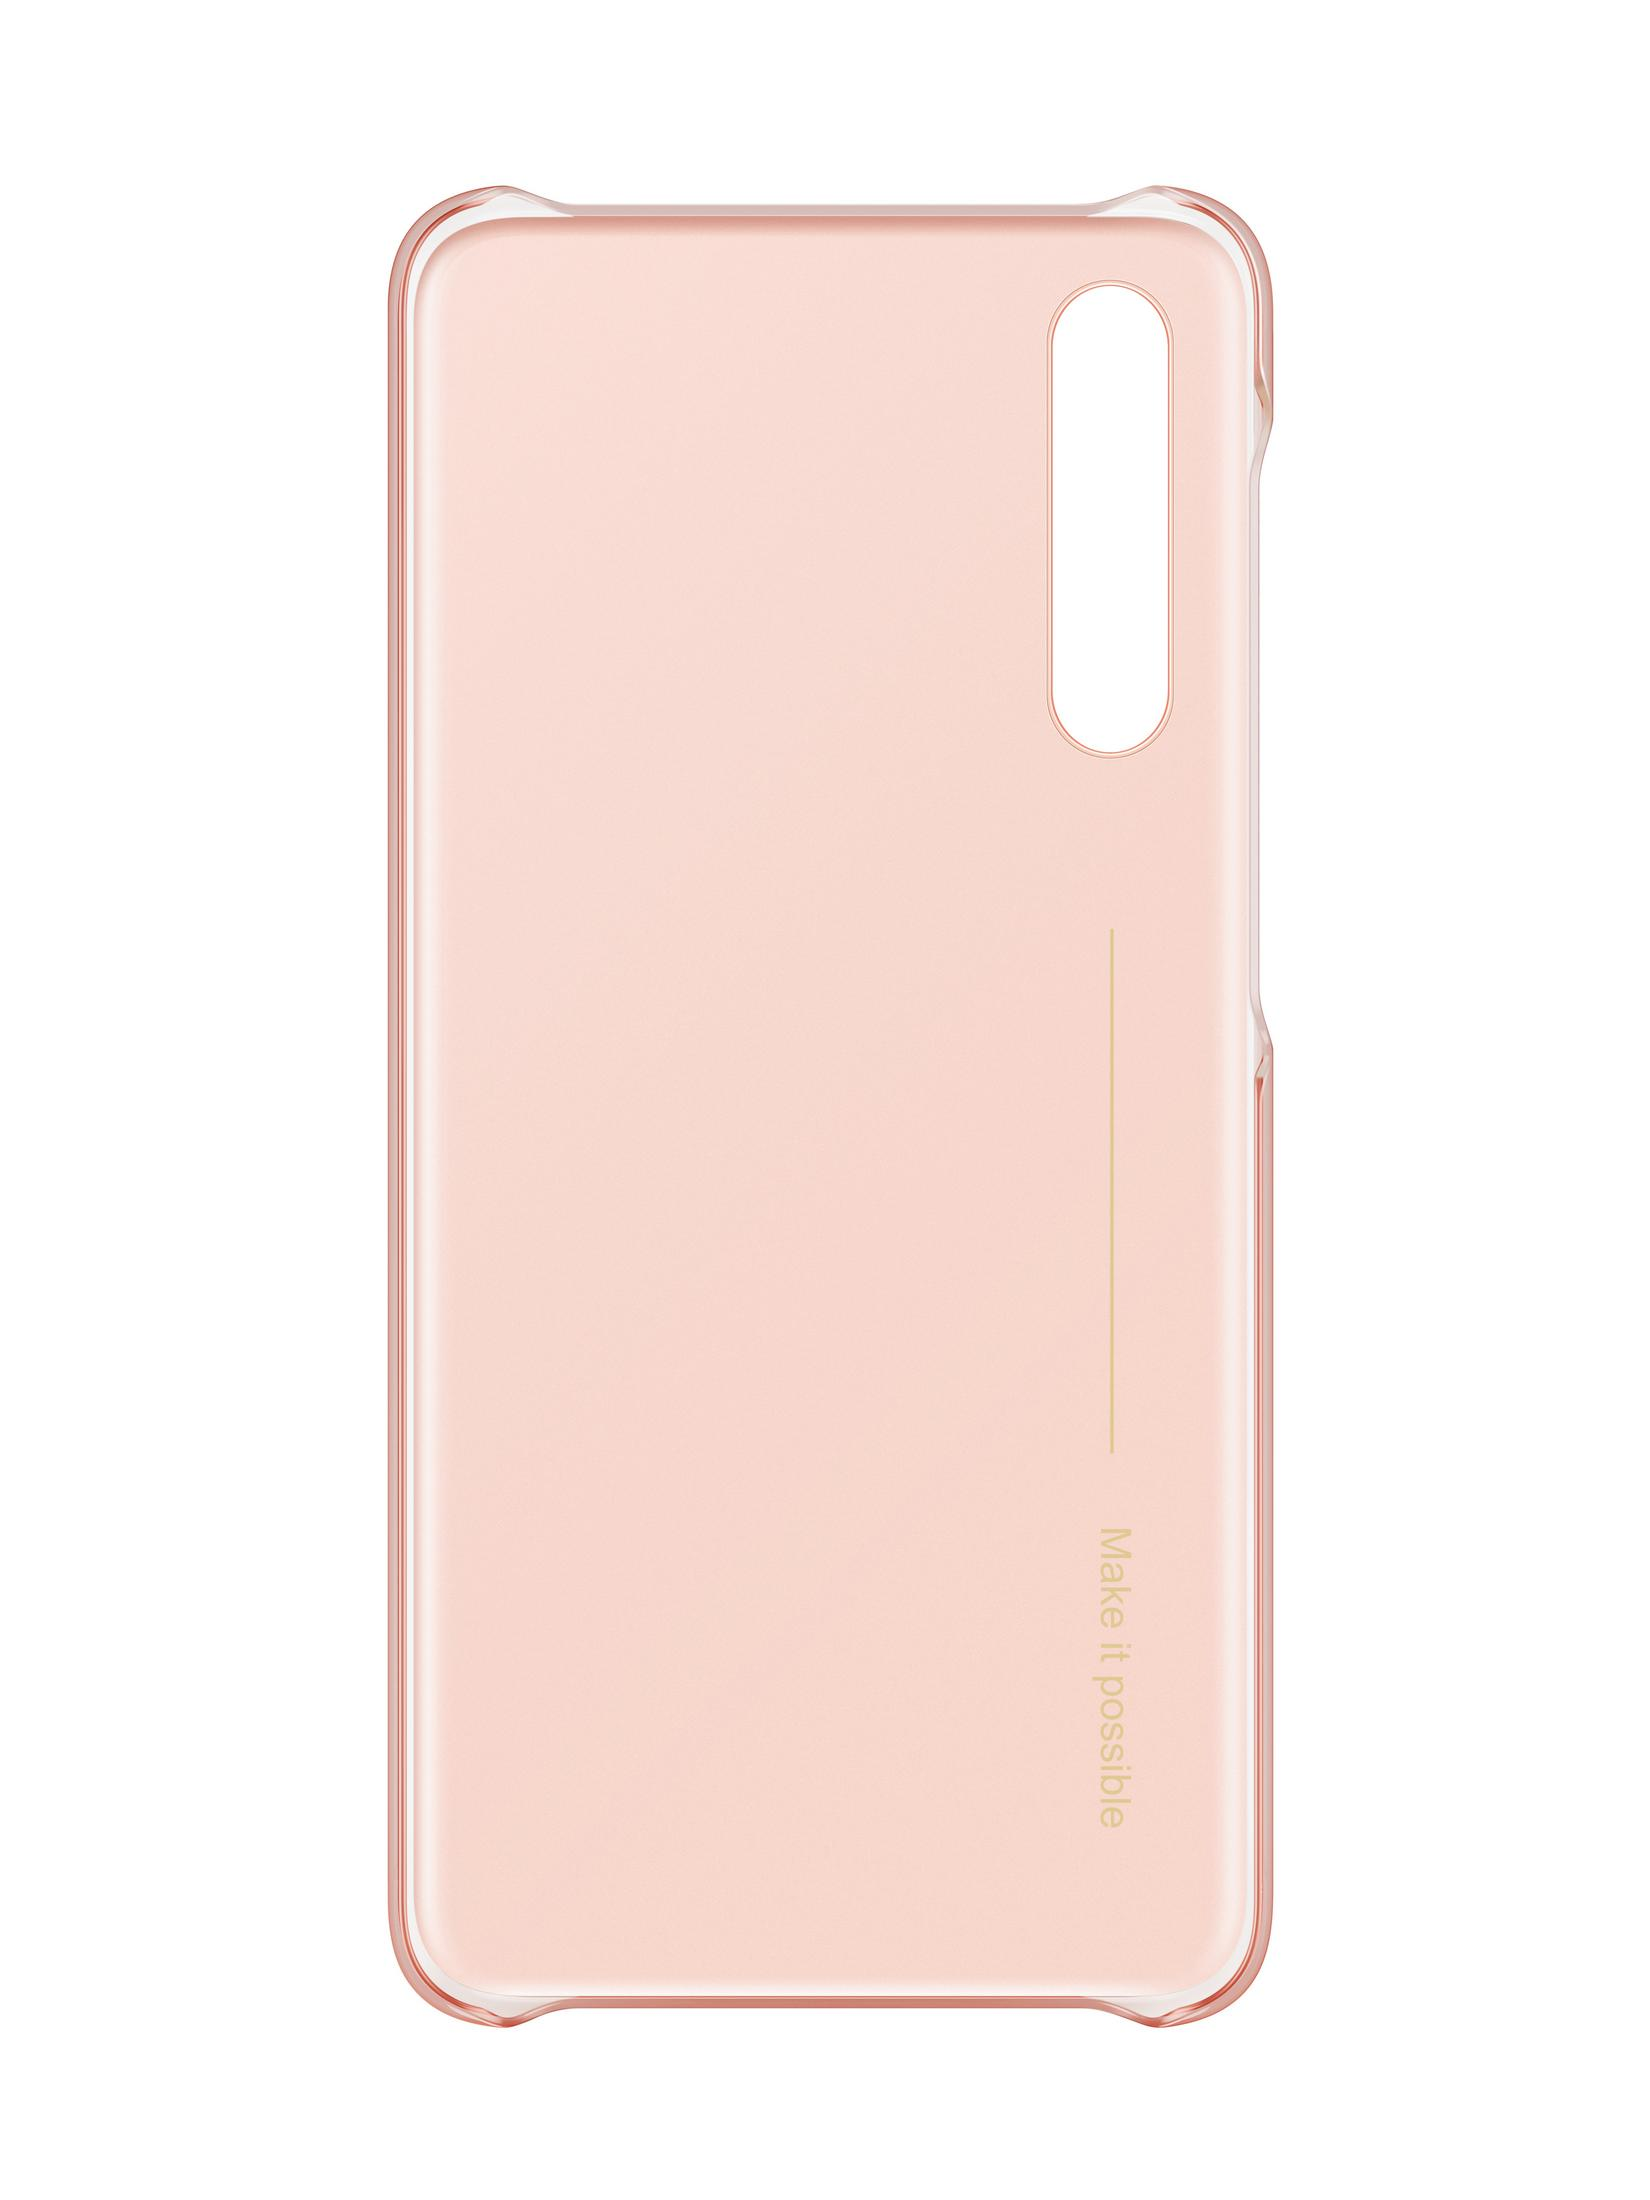 HUAWEI 51992376 P20 Backcover, CASE Pink Pro, P20 PINK, COLOR PRO Huawei